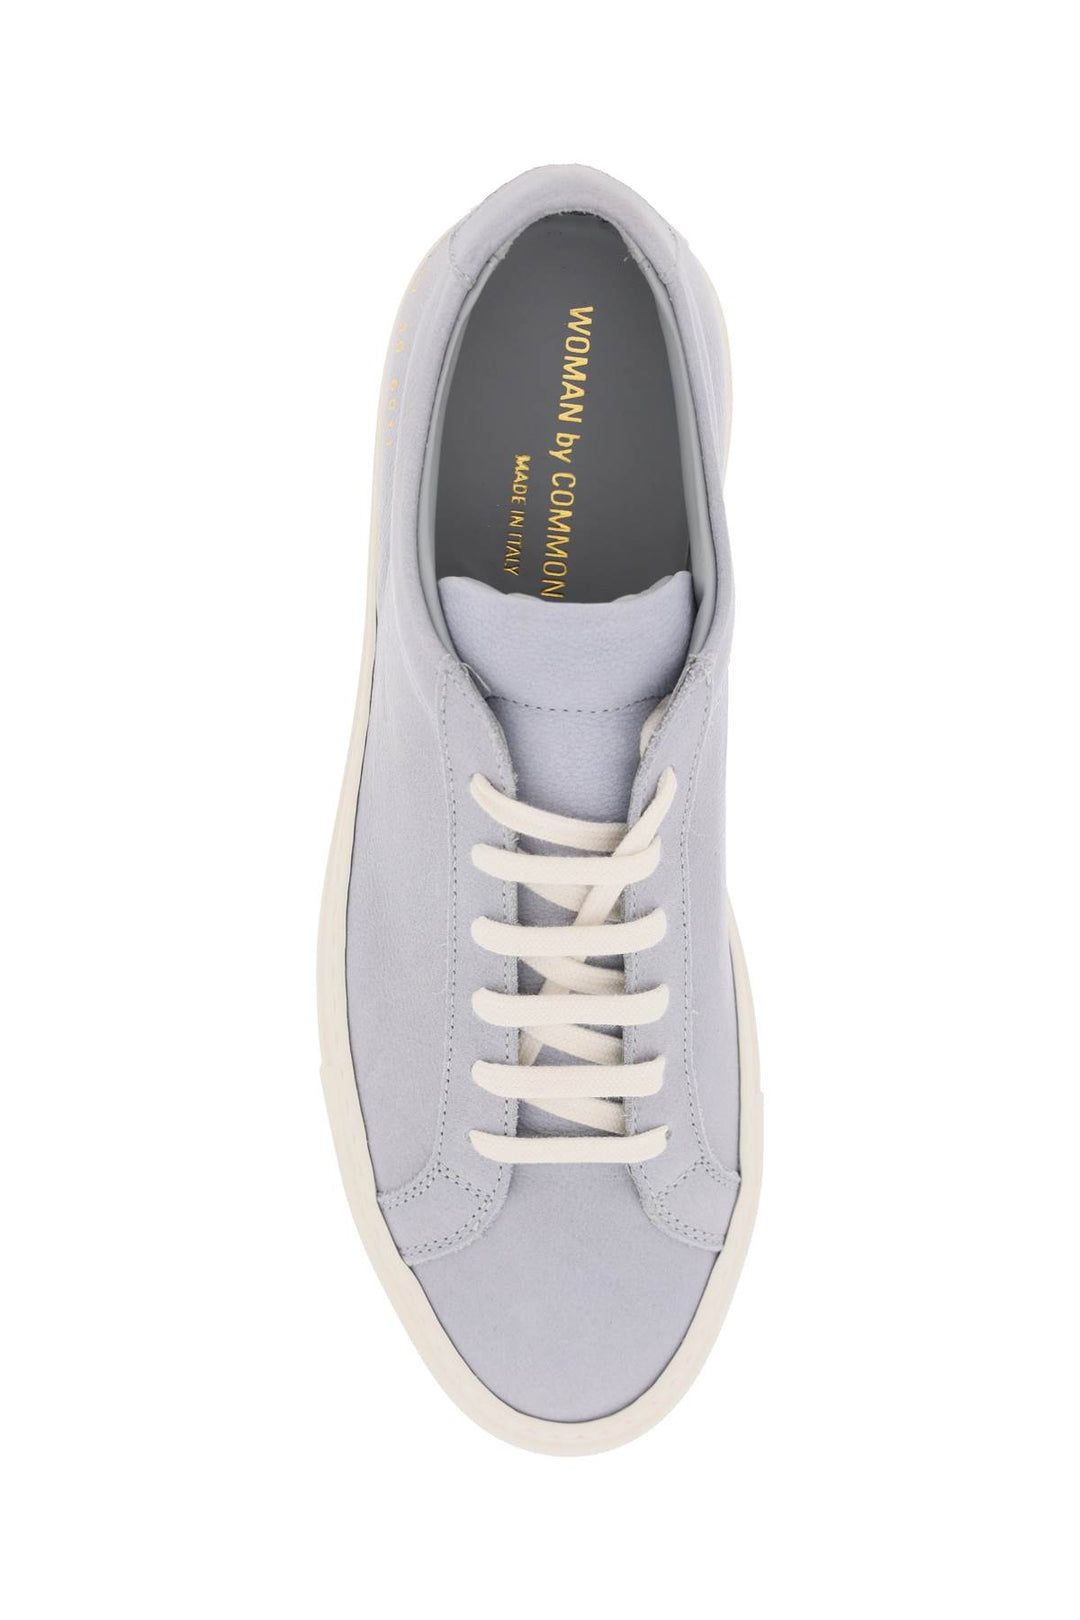 Common Projects Original Achilles Leather Sneakers   Light Blue